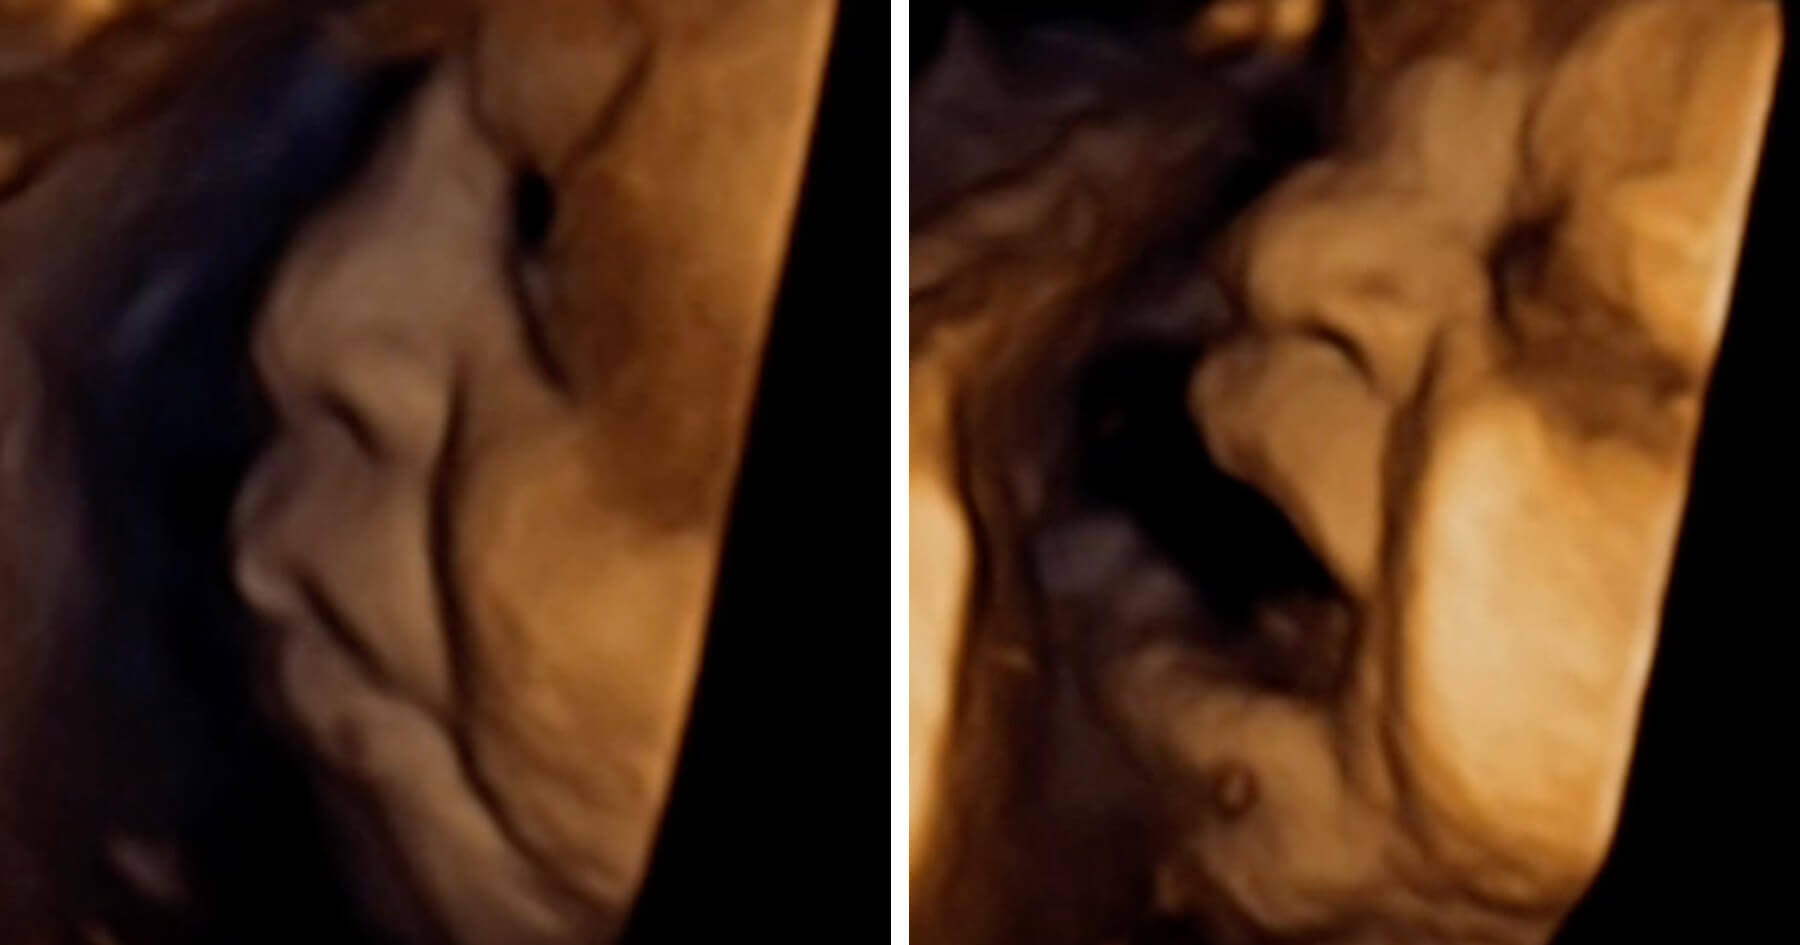 Shocking video shows baby in the womb reacting to being injected